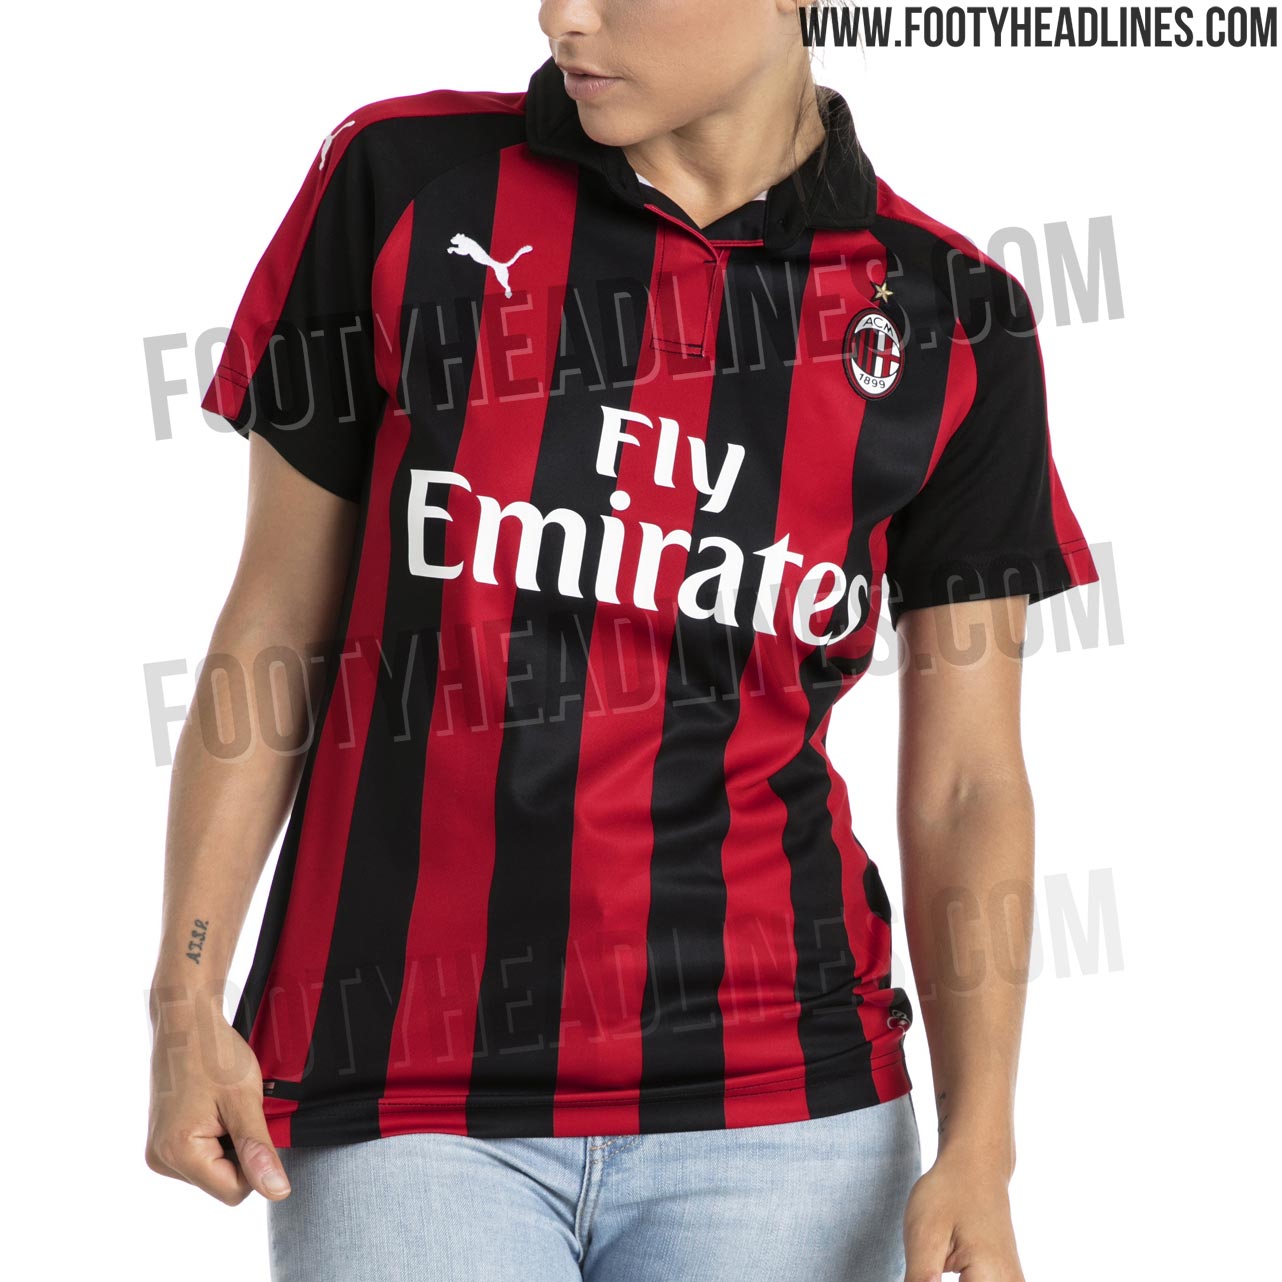 A New Milan - Puma AC 2018-19 Home, Away & Third Kits Leaked + Release Date Revealed - Footy Headlines